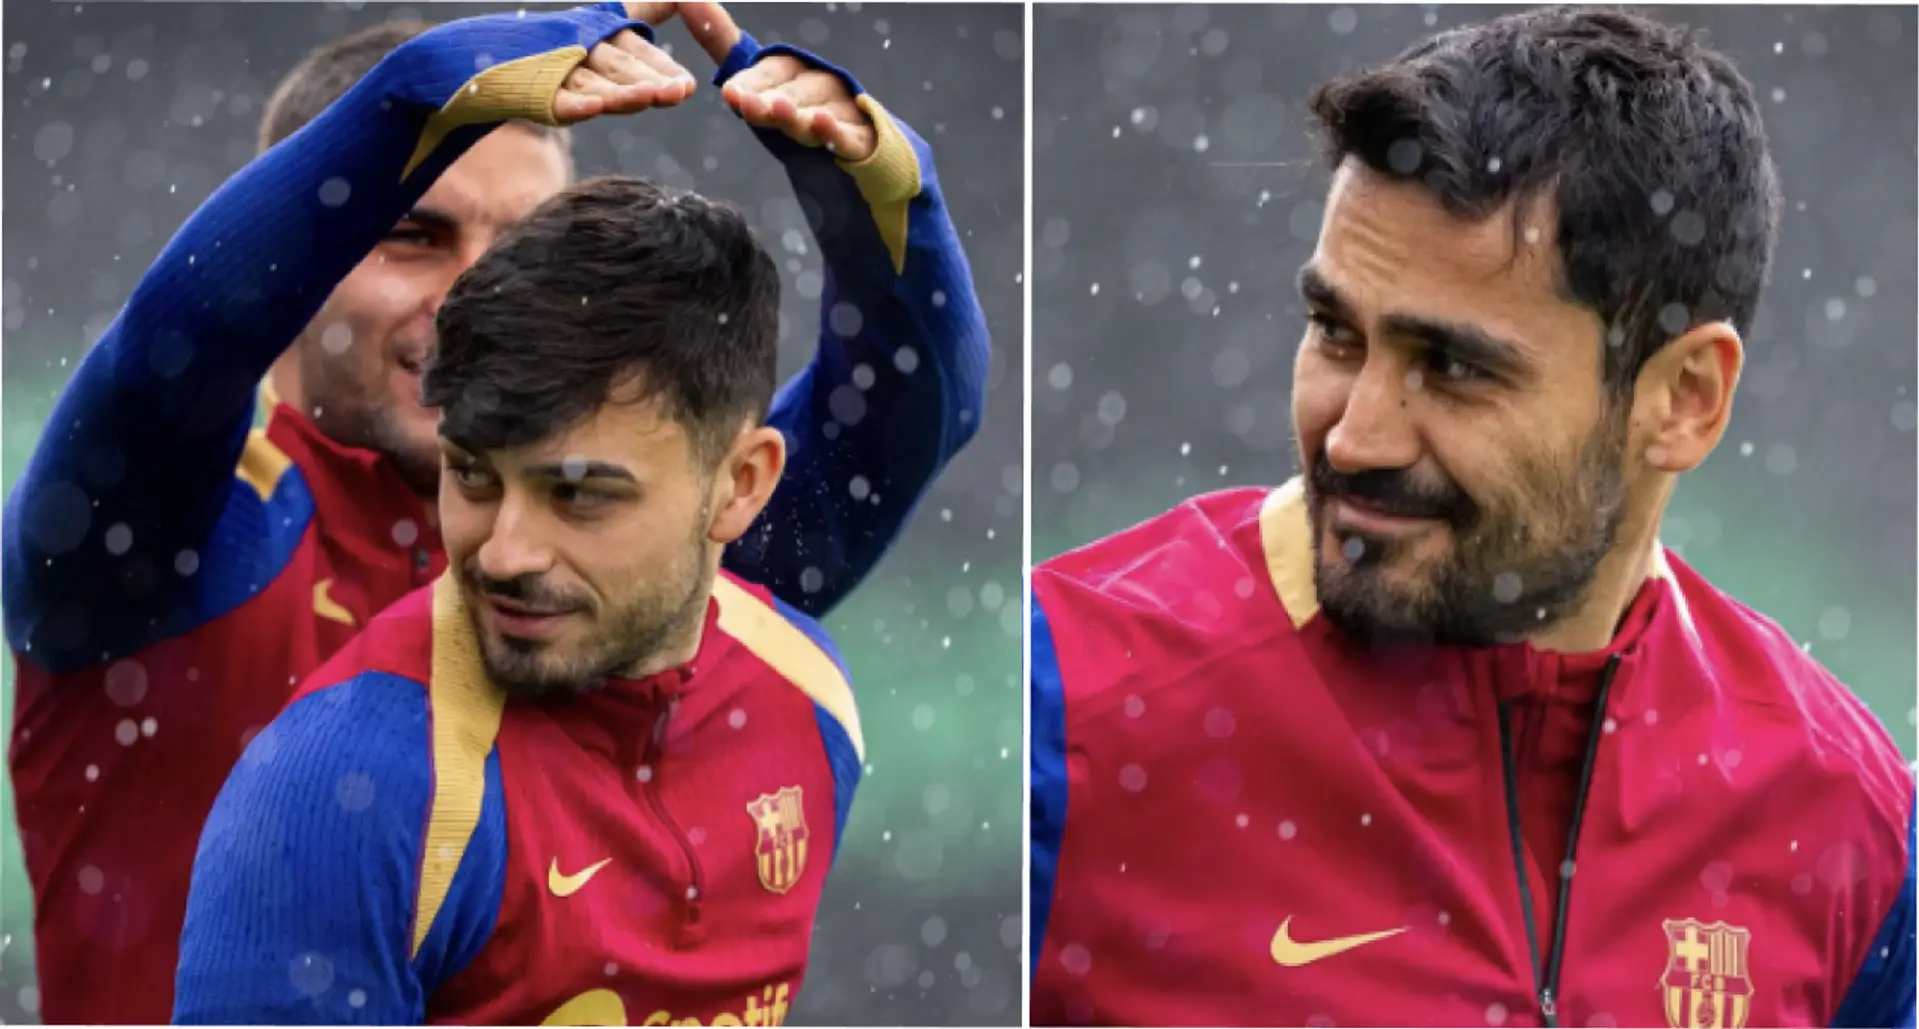 5 best pics of Barcelona players training in the rain 